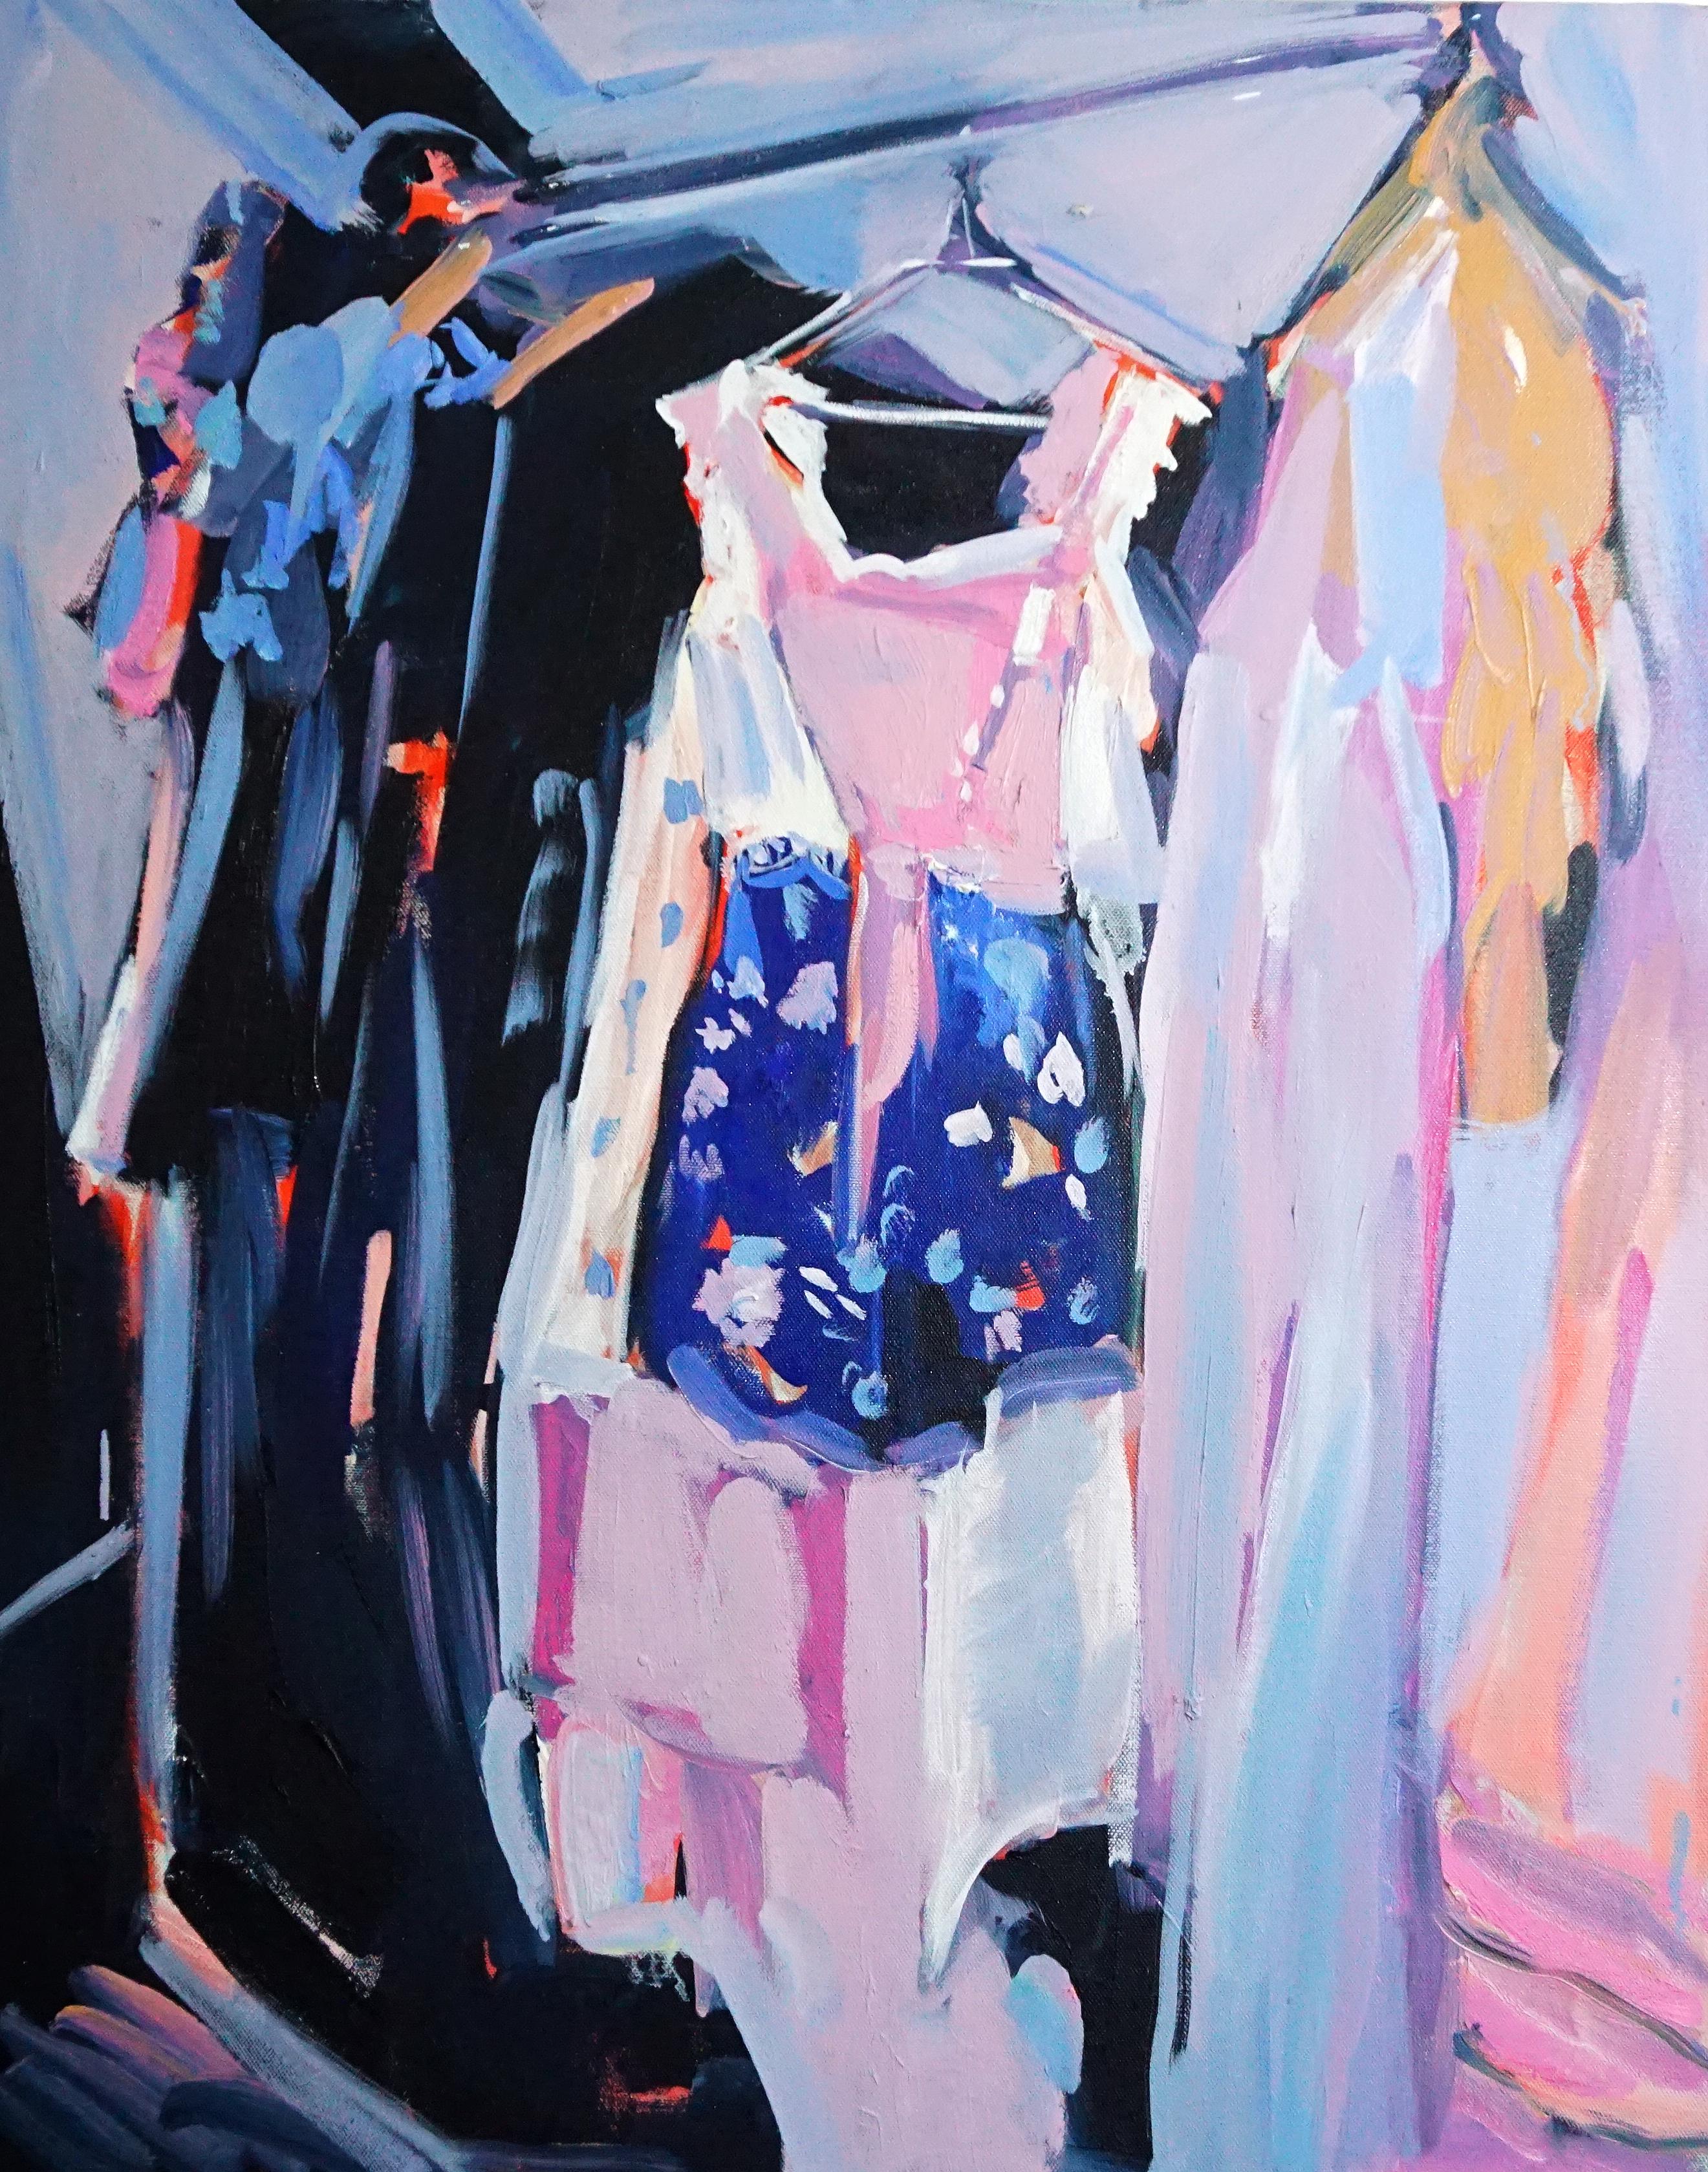 Going Out, Oil on canvas, bright and textured bedroom series with clothing